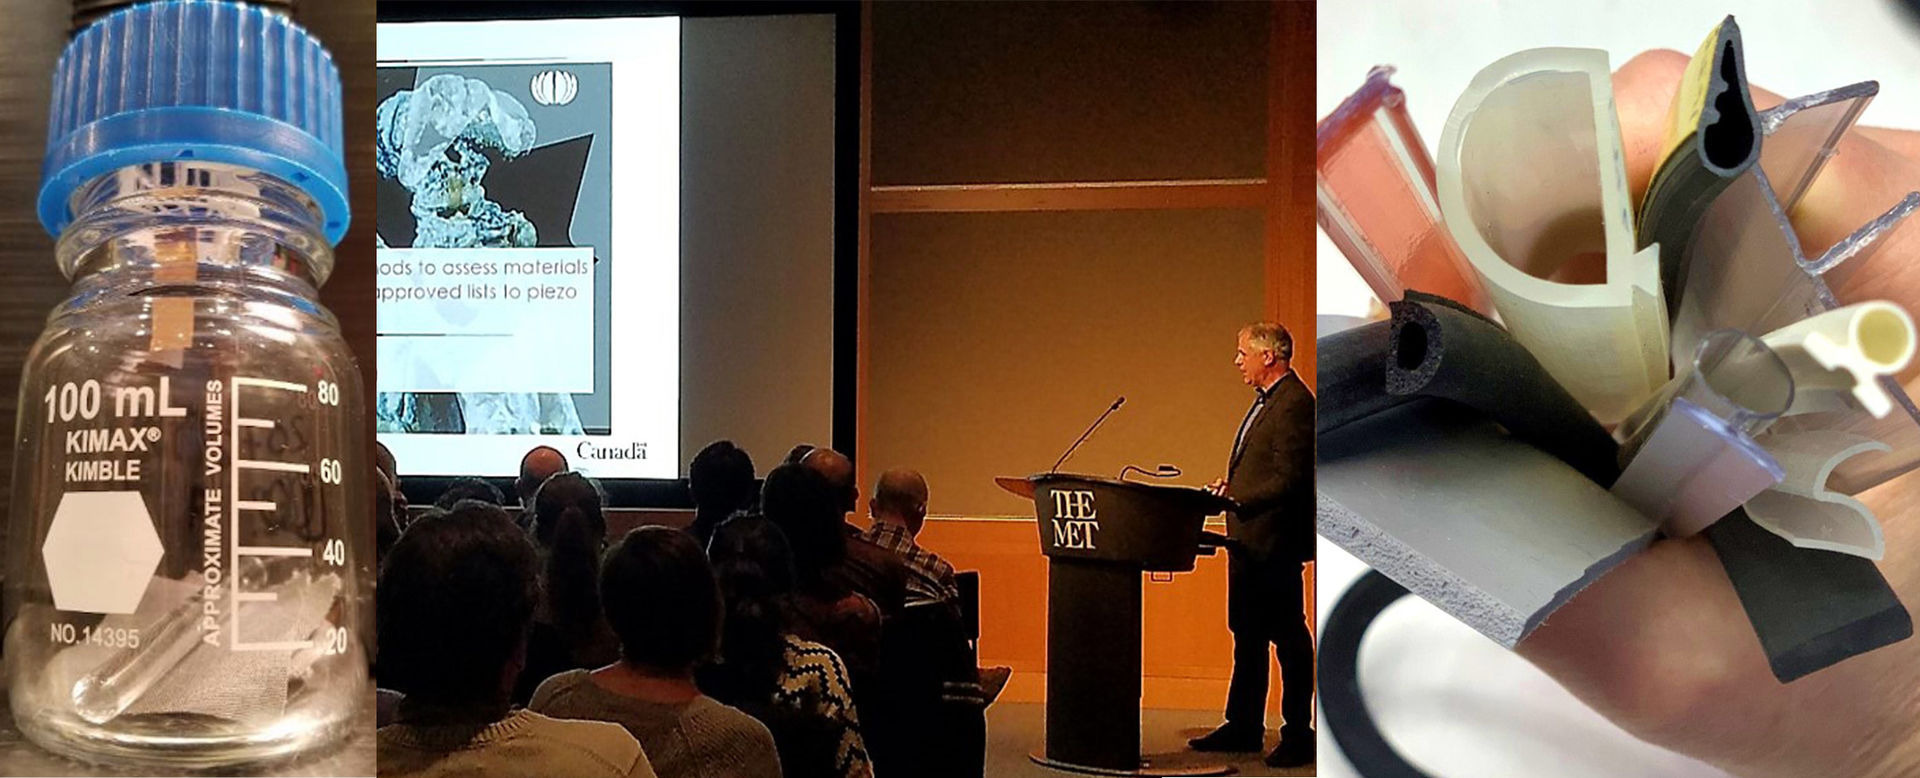 Composite of three images: on the left, a 100 mL clear clear glass bottle with blue twist top fills; in the middle, a presenter speaks at a podium gives a powerpoint presentation in front of an audience; on the right, a hand holds a bundle of variously sized black, cream, and clear-colored spherical and half-spherical tubes. 